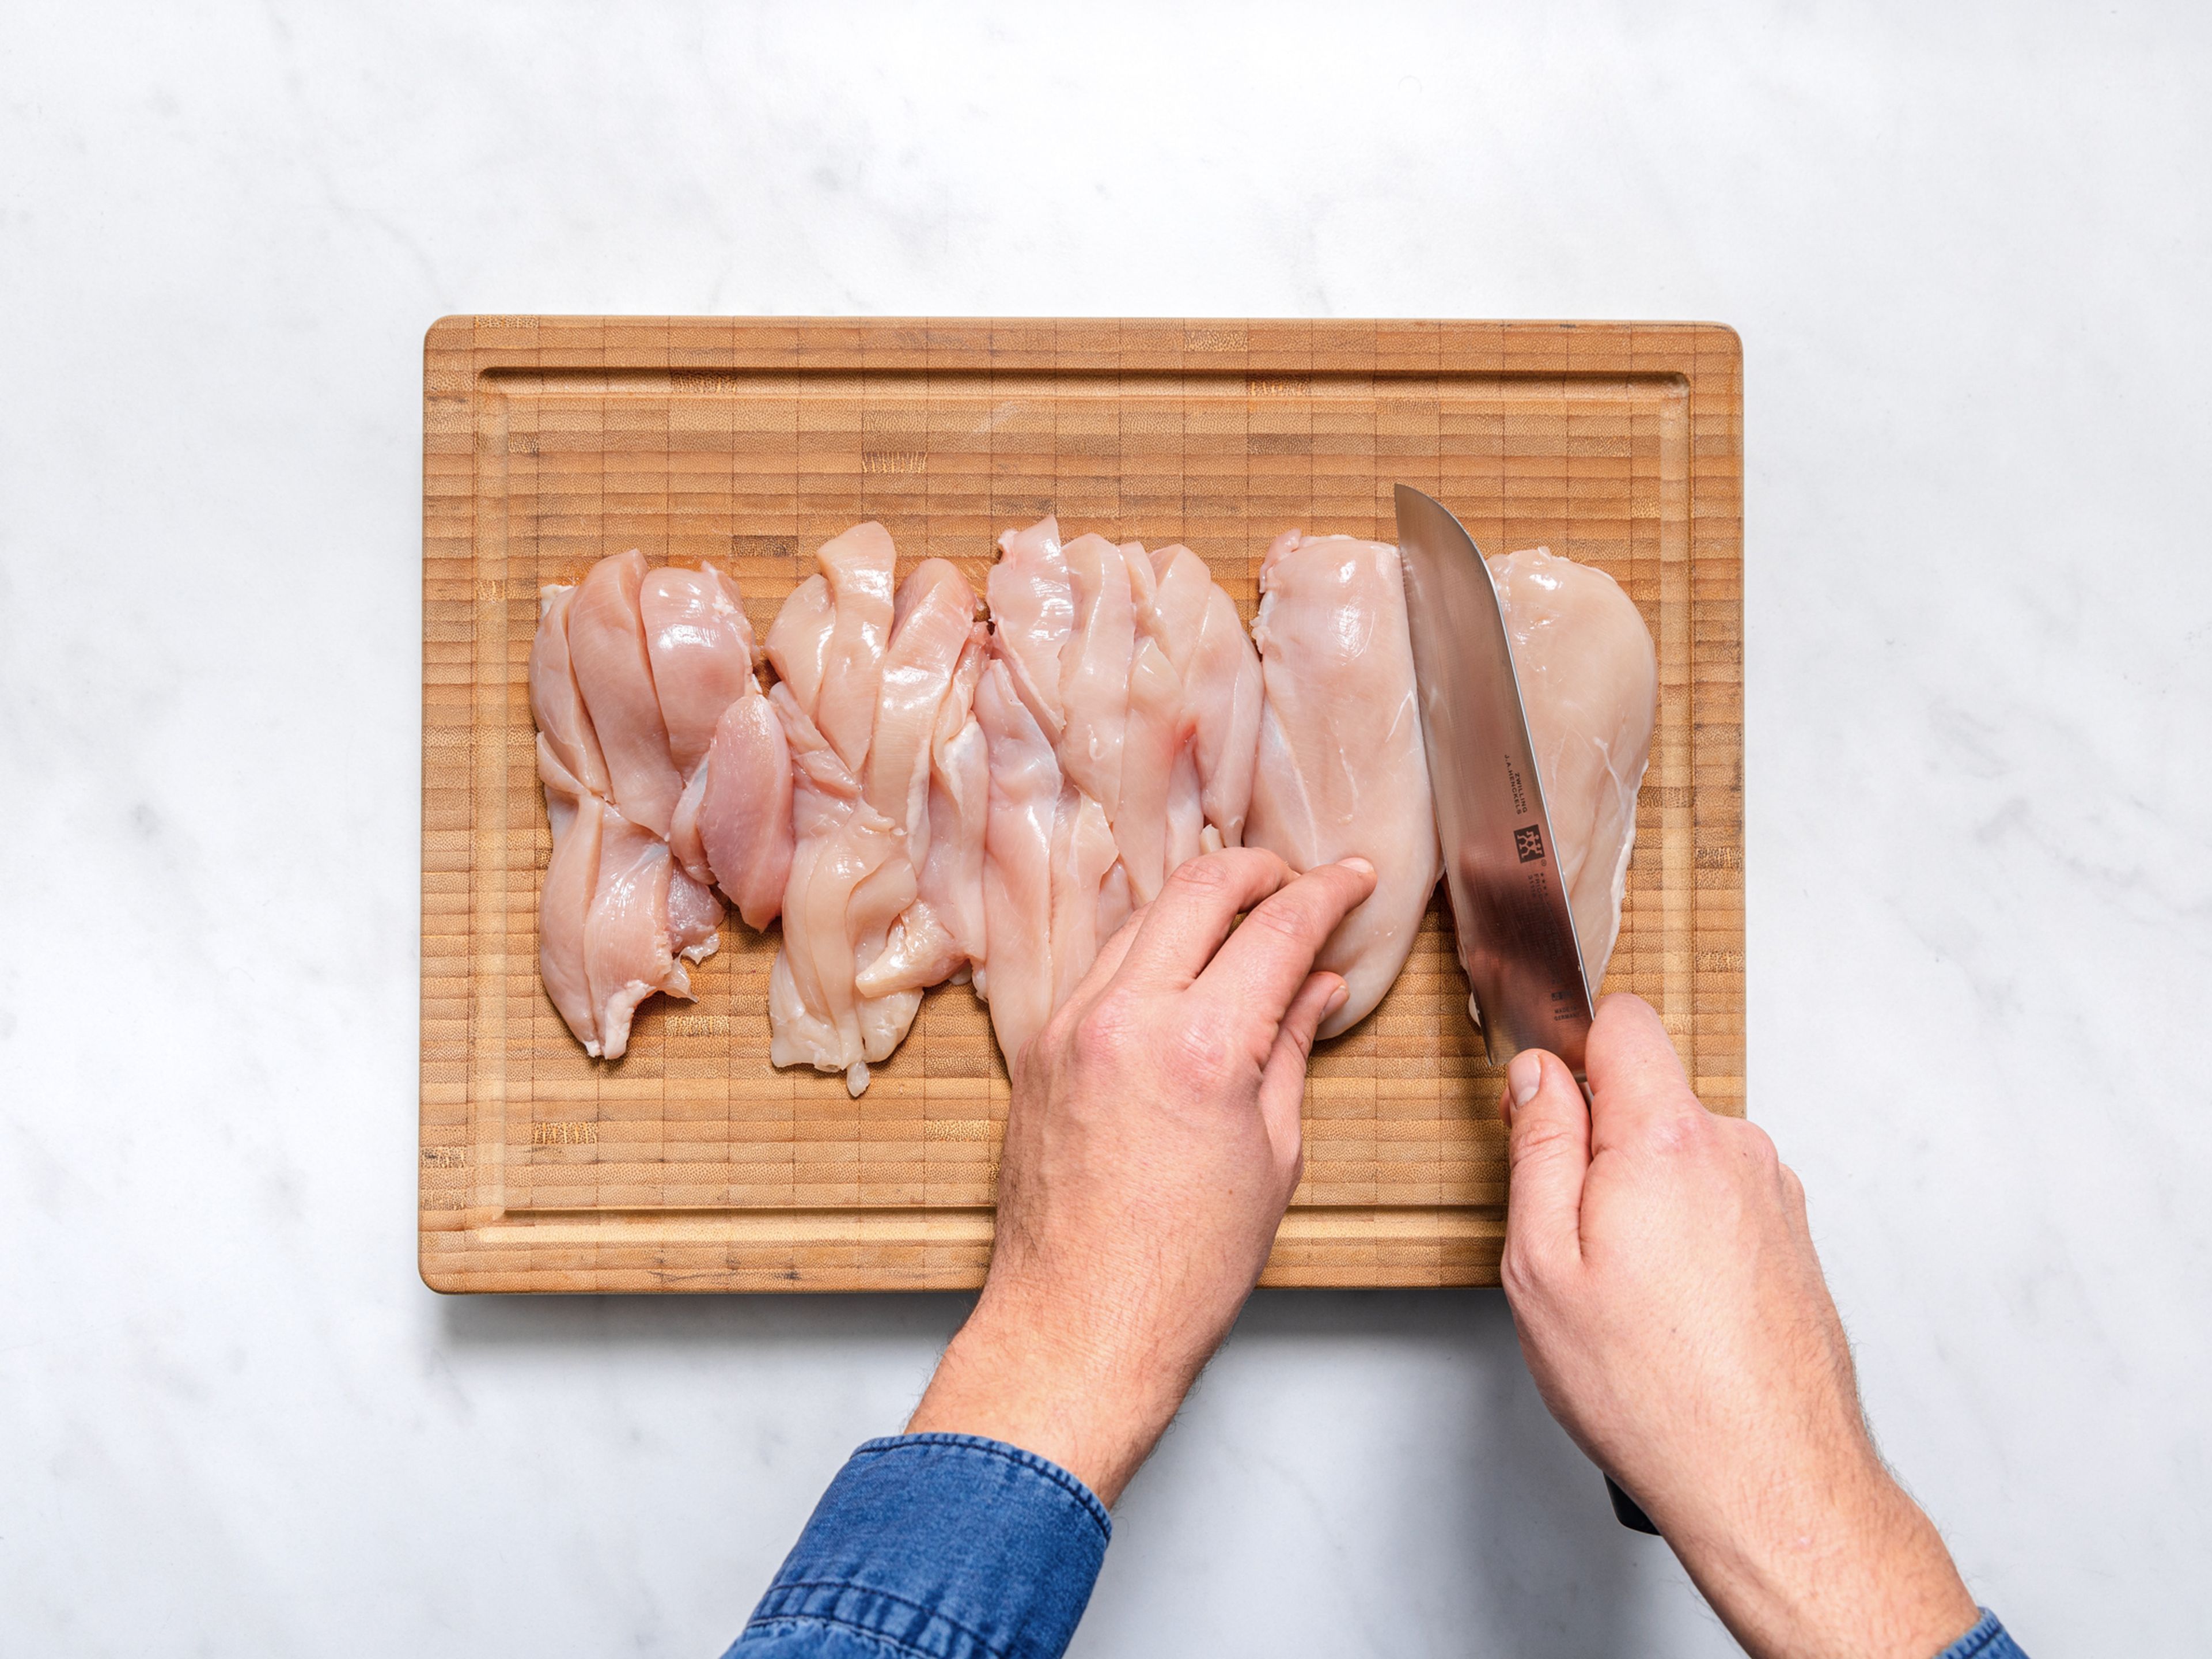 Preheat the oven to 200°C/400°F. Cut chicken breasts into strips. Spread breadcrumbs on a baking sheet in an even layer. Bake until lightly golden brown, approx. 3 – 5 min. Remove from the oven and let cool completely.